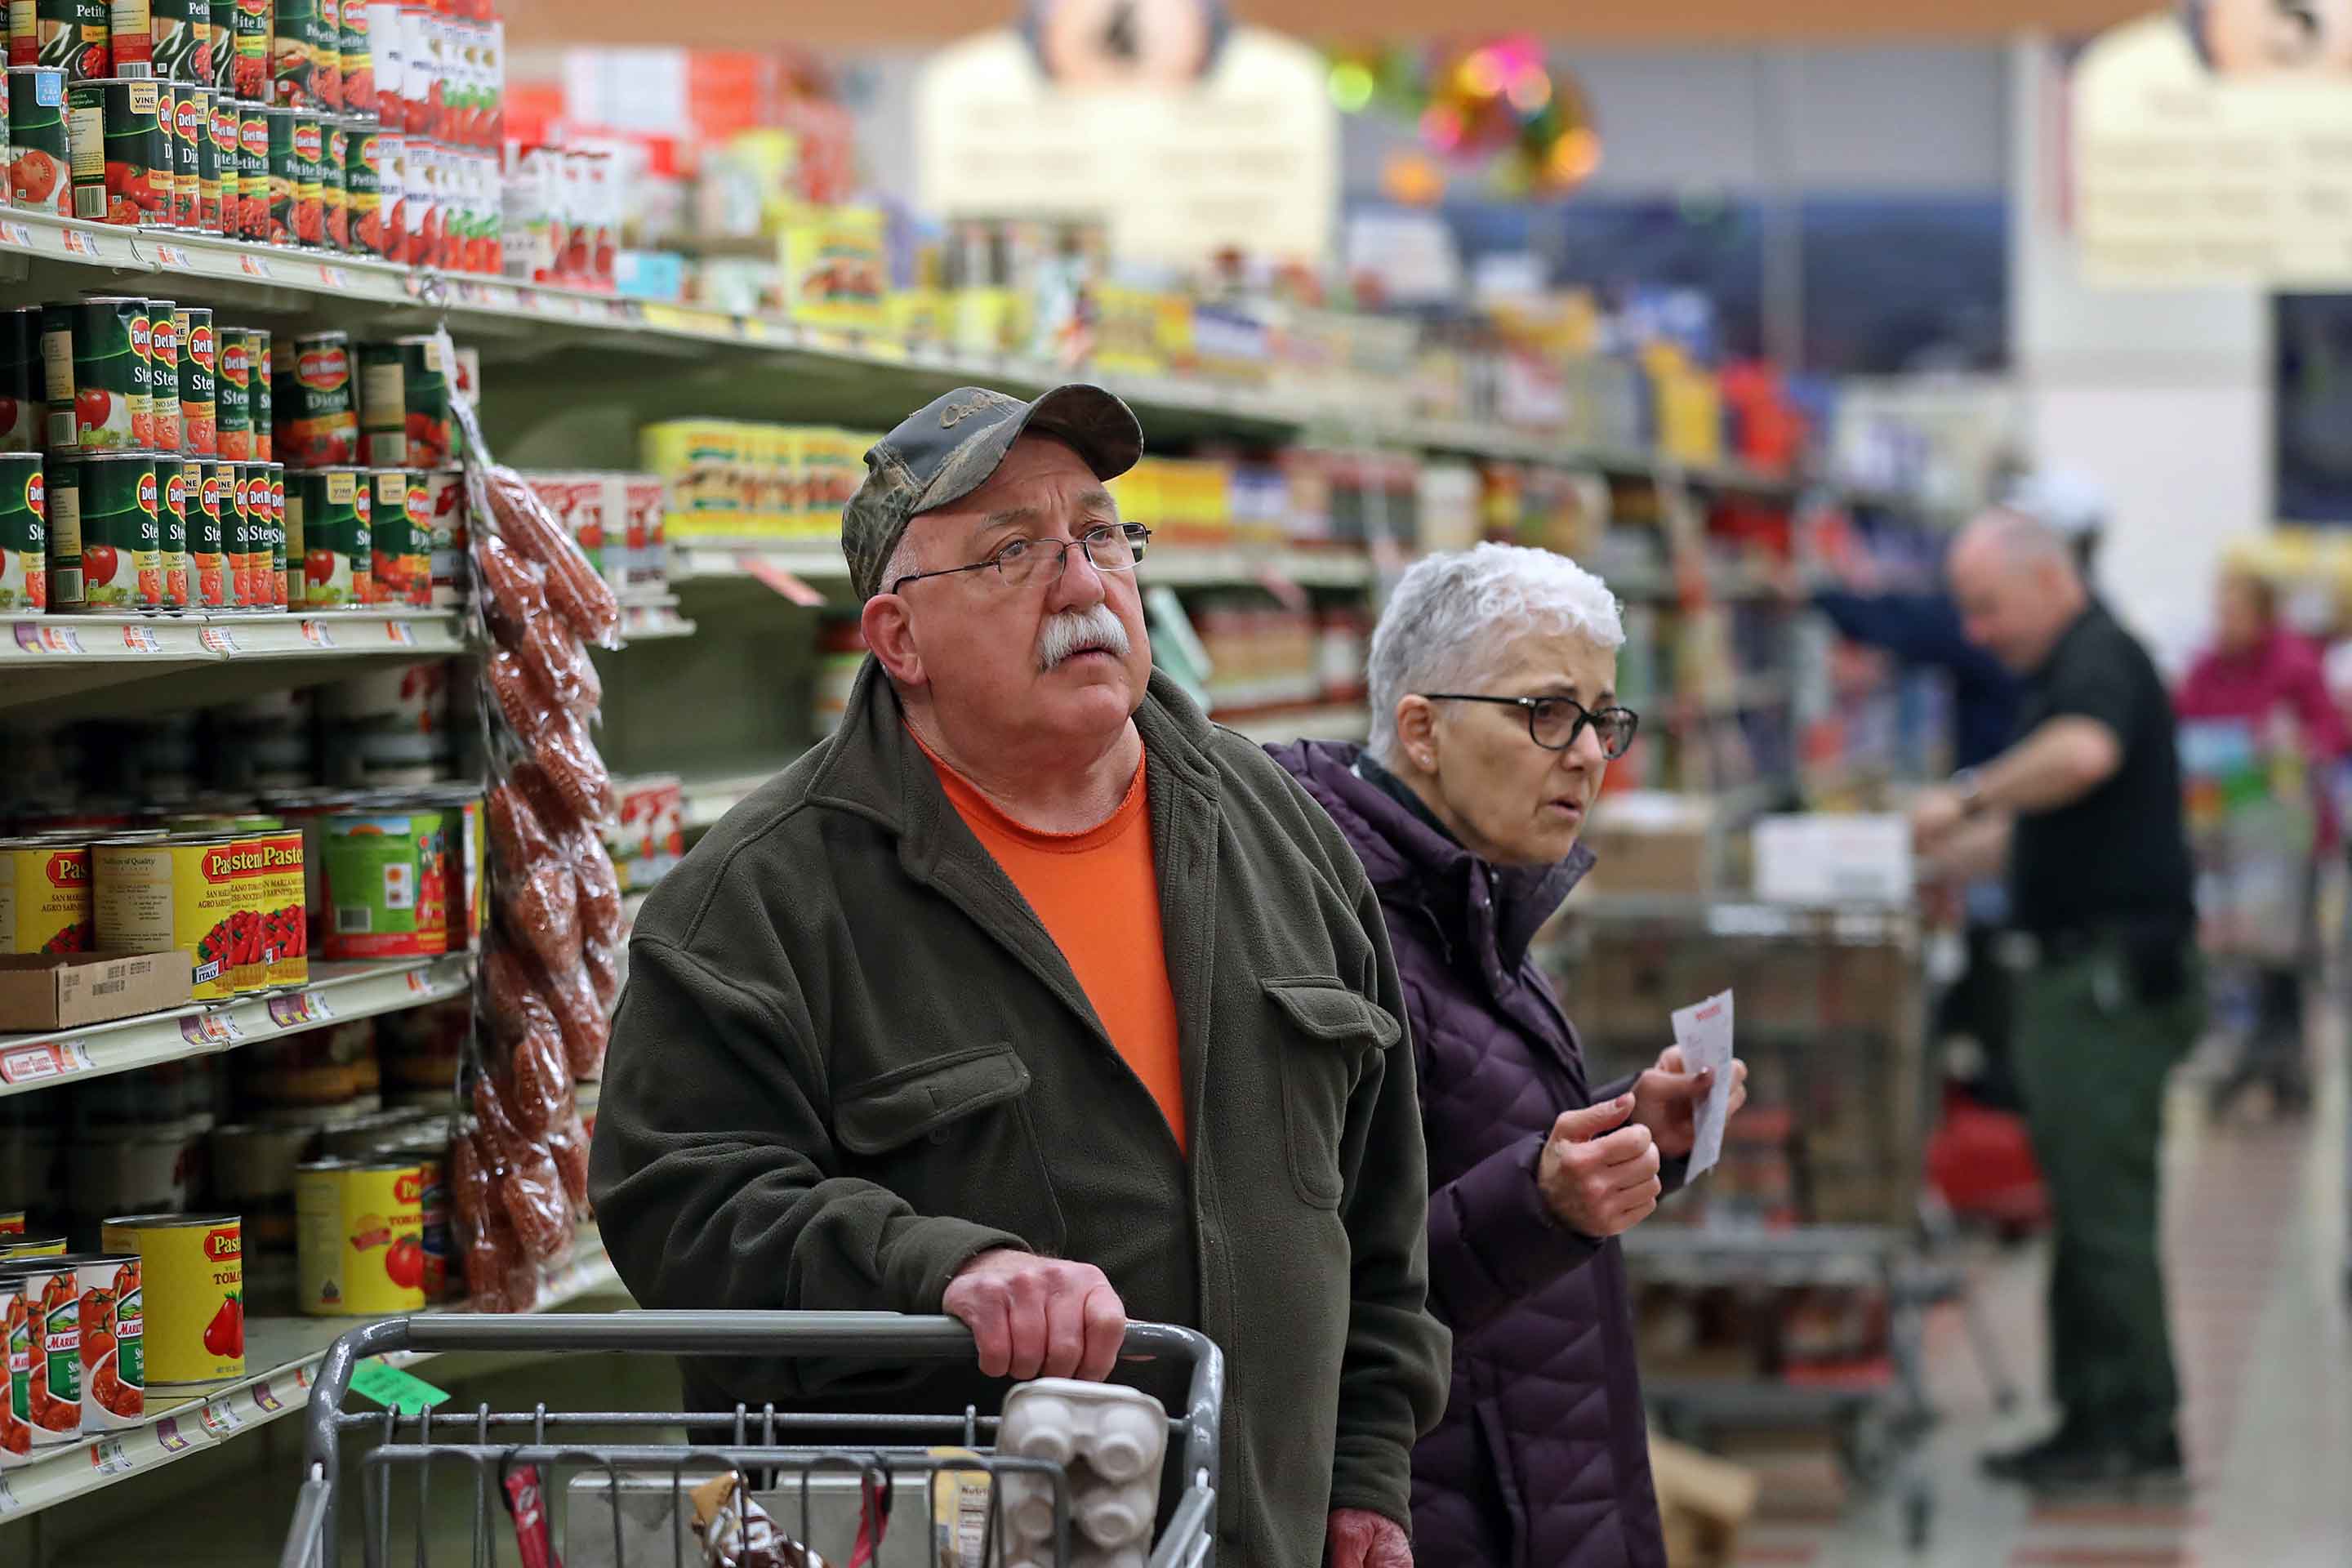 Digital-Only Coupons Discriminate Against Seniors and Low-Income Shoppers: Report